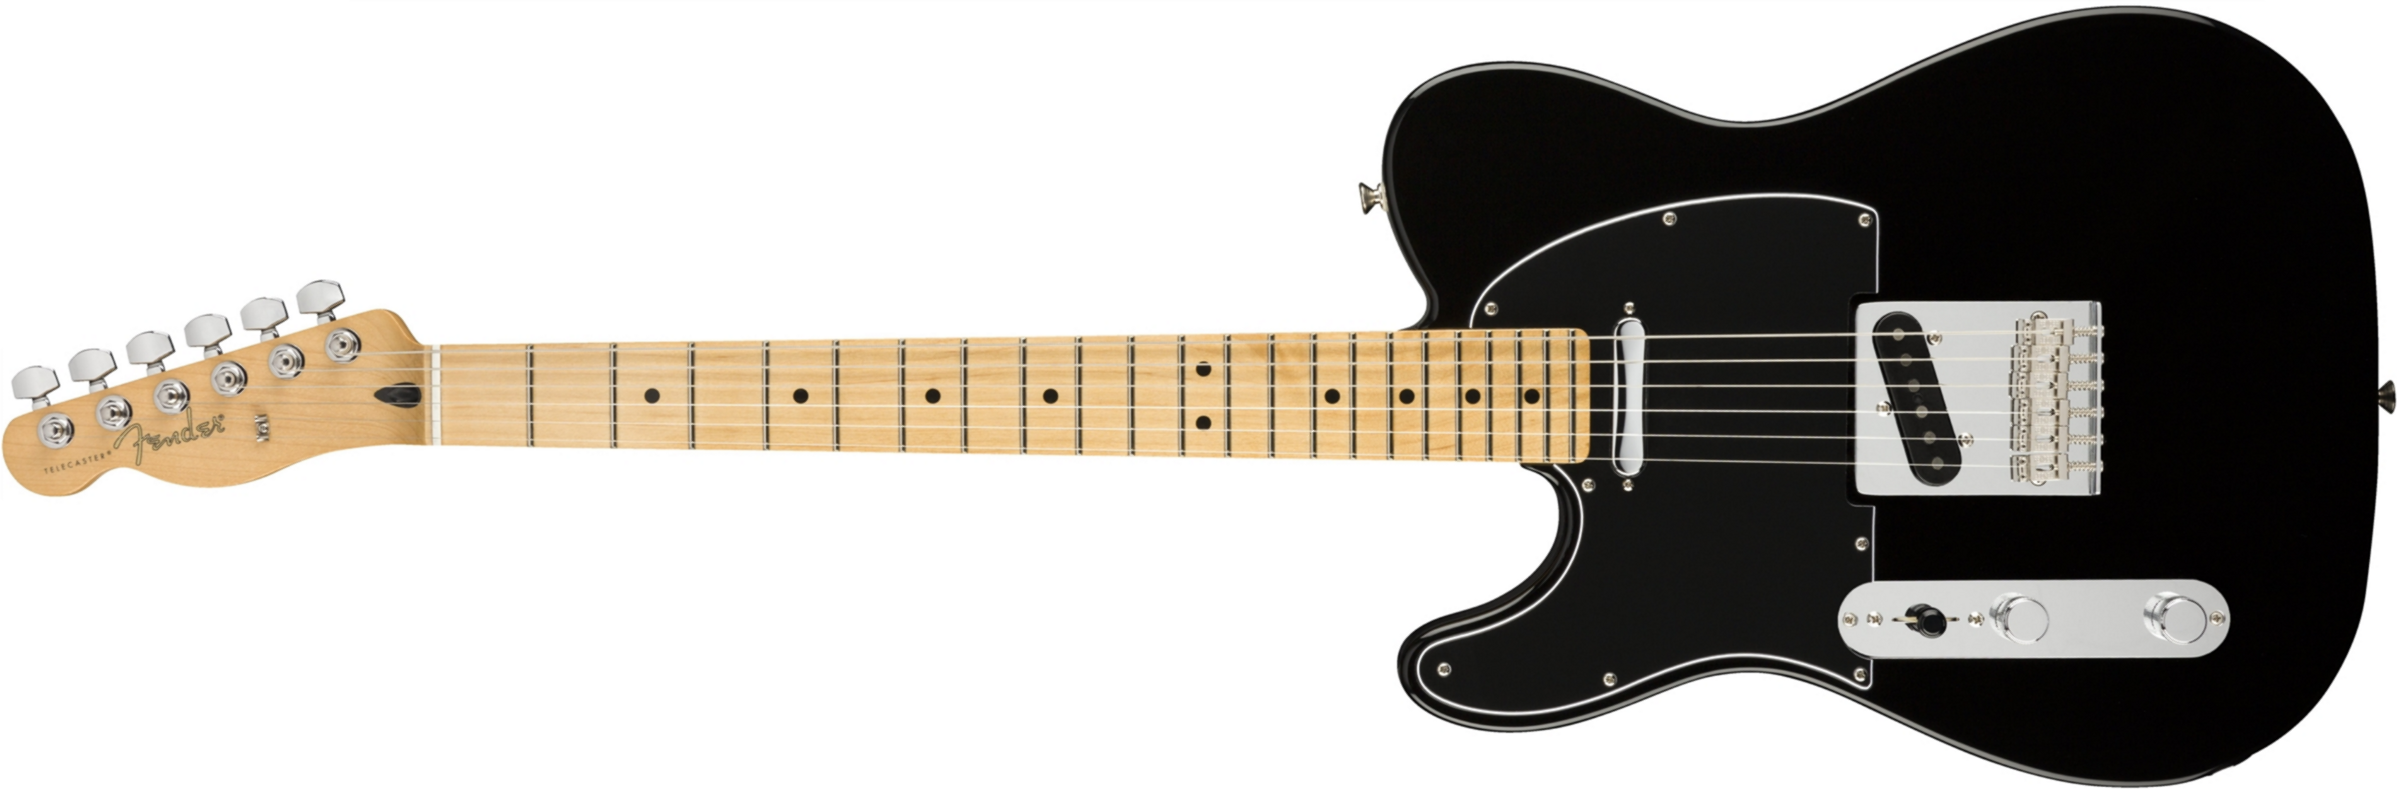 Fender Tele Player Lh Gaucher Mex Ss Mn - Black - Left-handed electric guitar - Main picture